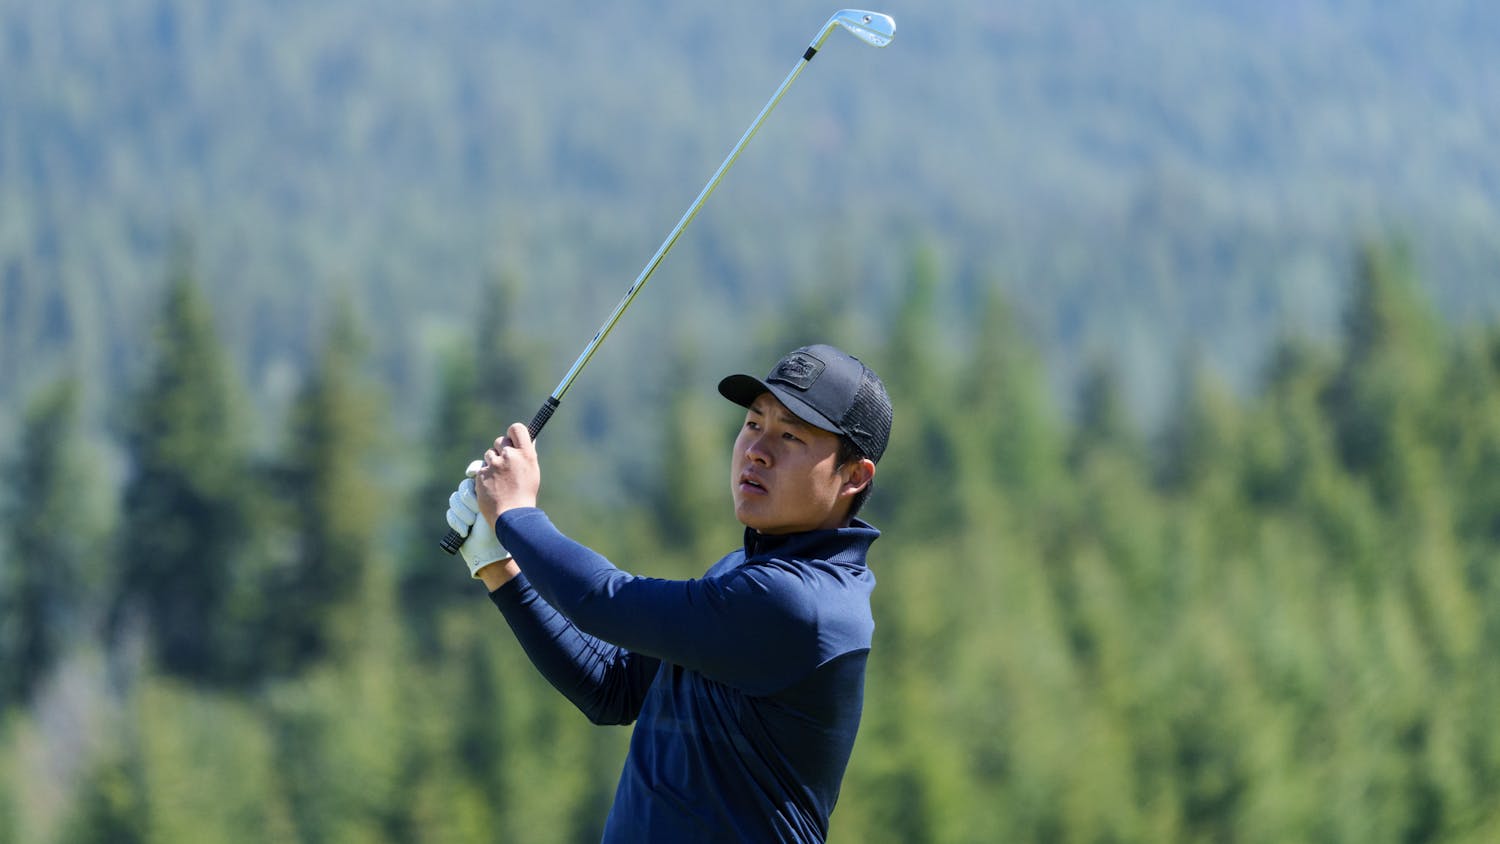 Florida's Yuxin Lin of the Florida men's golf team competes in the first round of the 2021 NCAA  Cle Elum Regional at Tumble Creek Golf Club in Cle Elum, Wash., on May 19, 2021. (Photography by Stephen Brashear/Red Box Pictures)